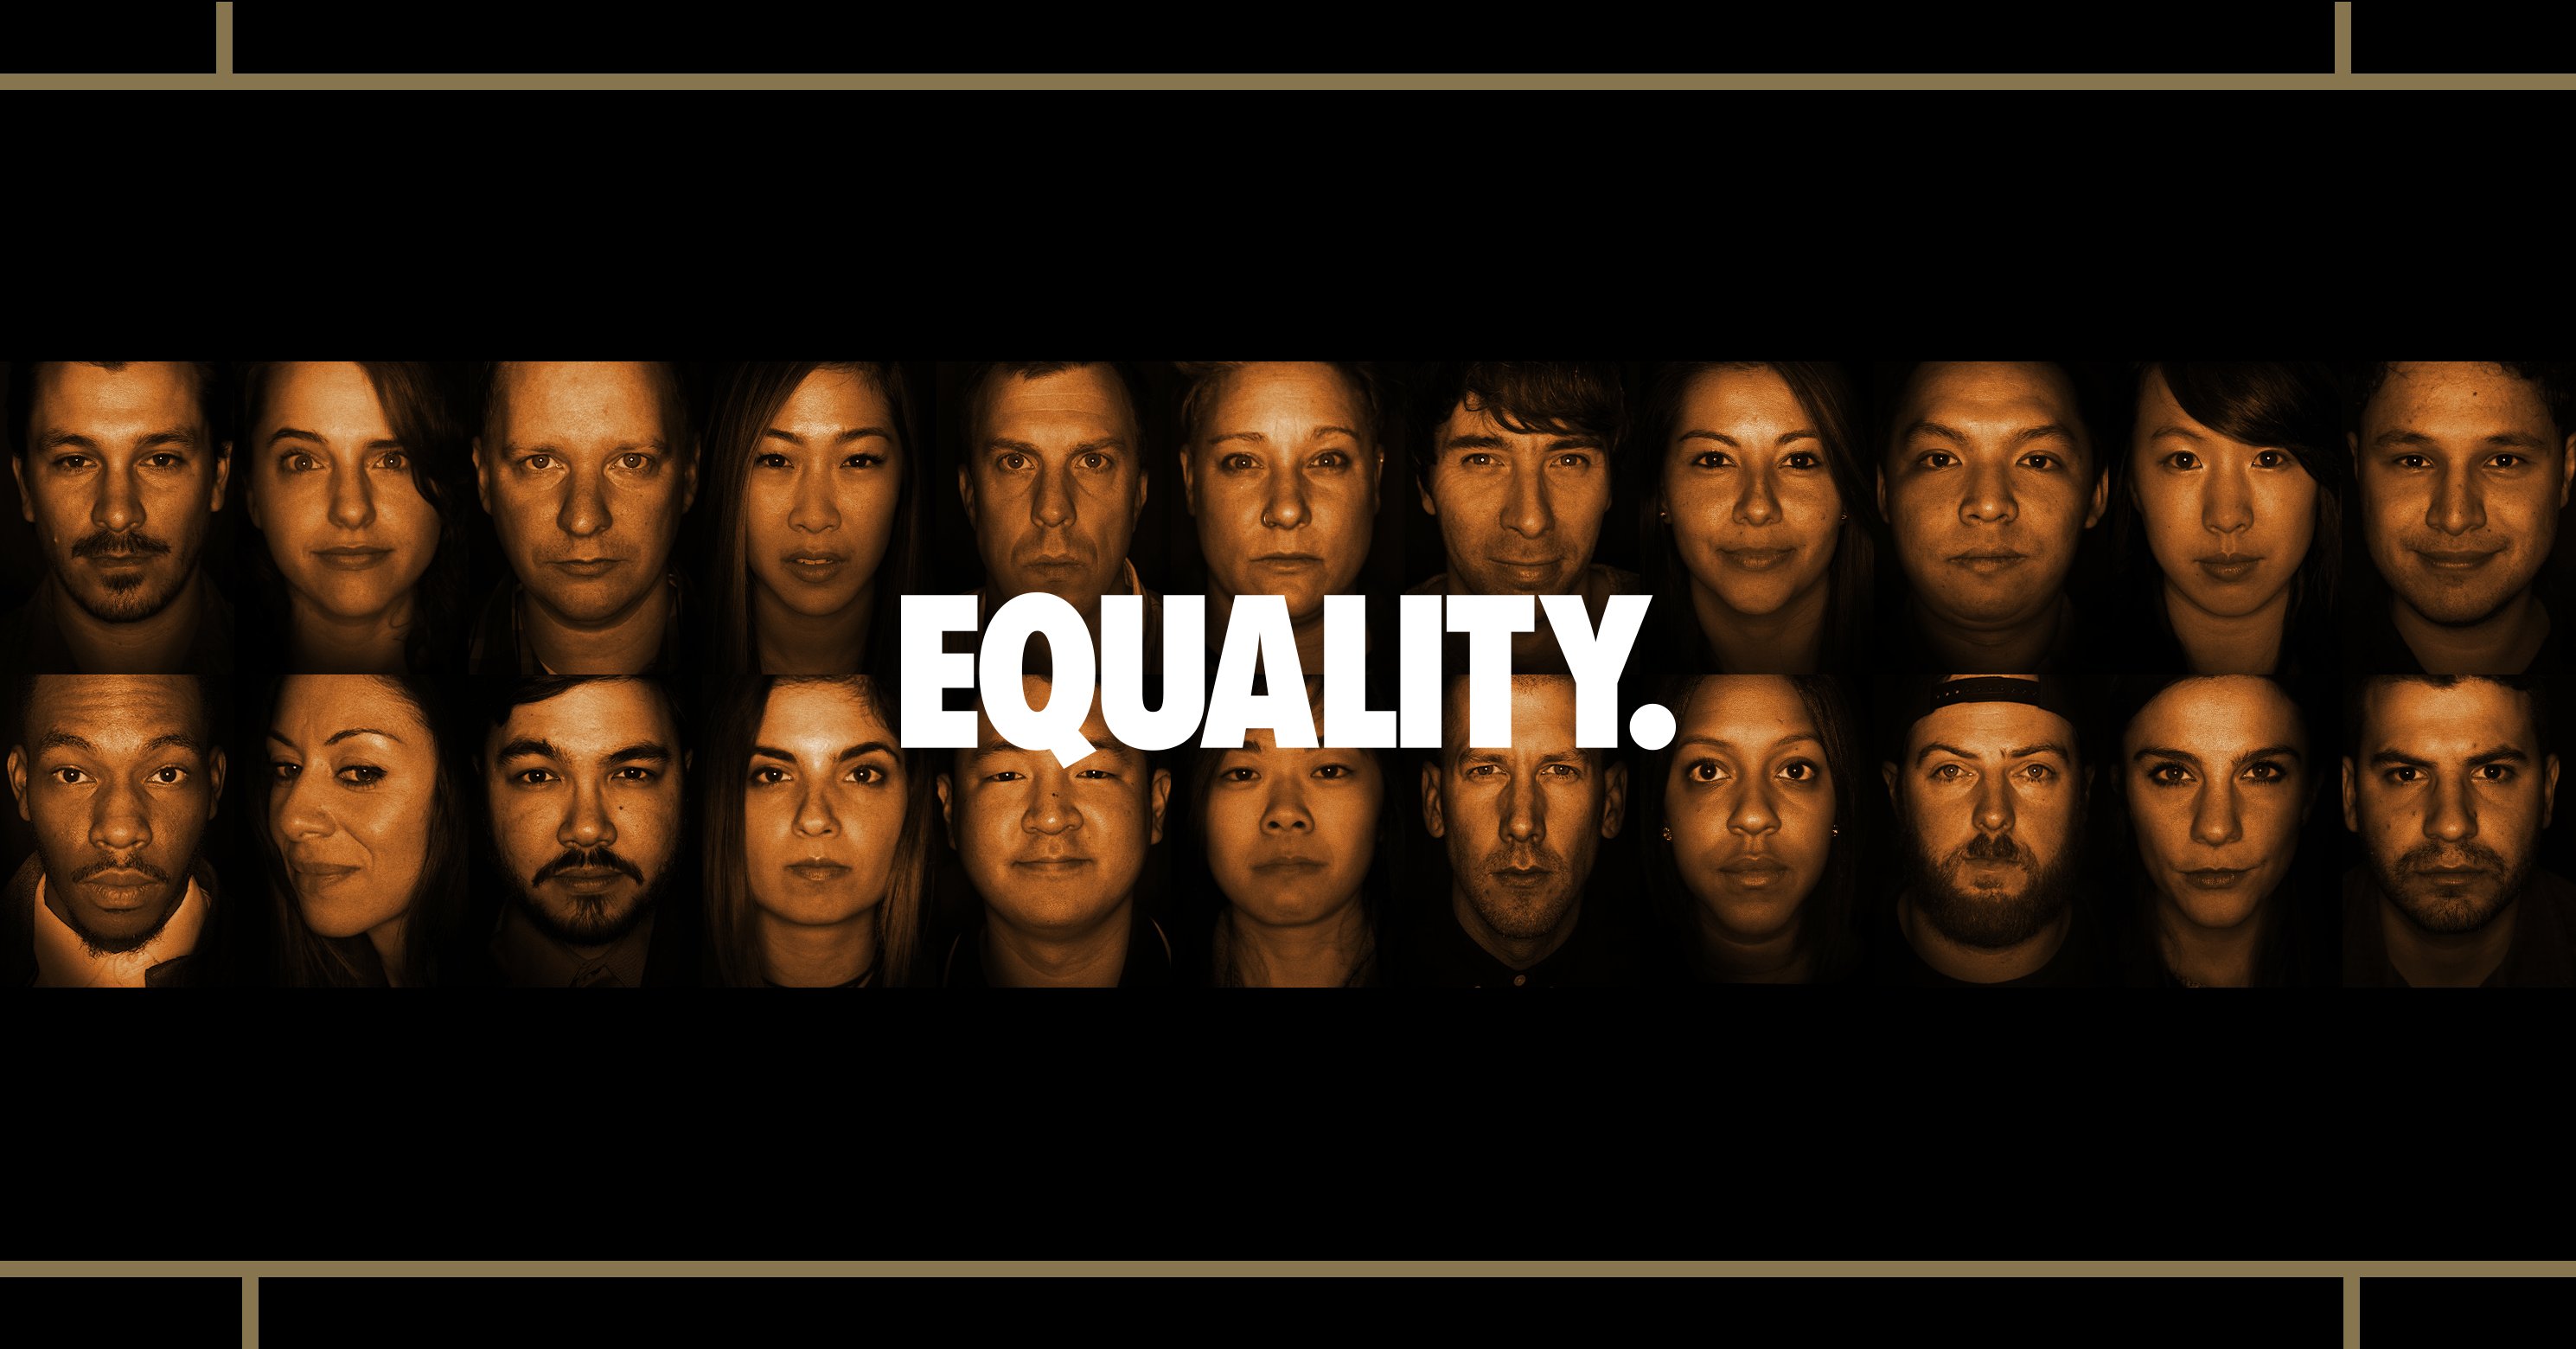 FoxTales on Twitter: "#EQUALITY. at @Nike WHQ taking portraits with Nike employees for their Equality campaign, promoting diversity &amp; for all. https://t.co/FGfqmHtdsn" / Twitter